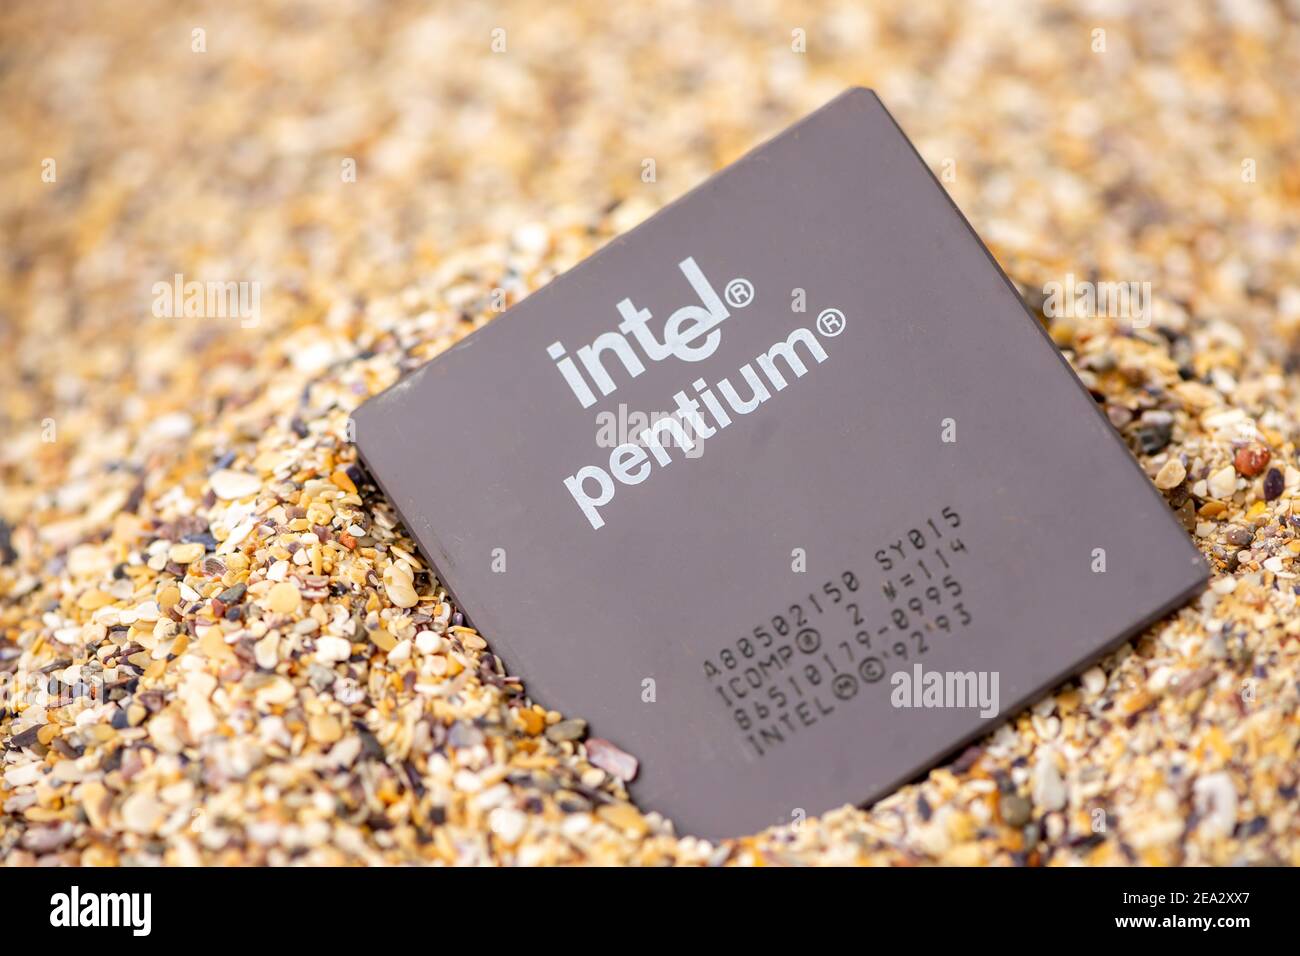 Timisoara, Romania - October 17, 2020: Close-up of an Intel Pentium A80502150 processor, 150 Mhz, socket 7 with sand in the background. Stock Photo